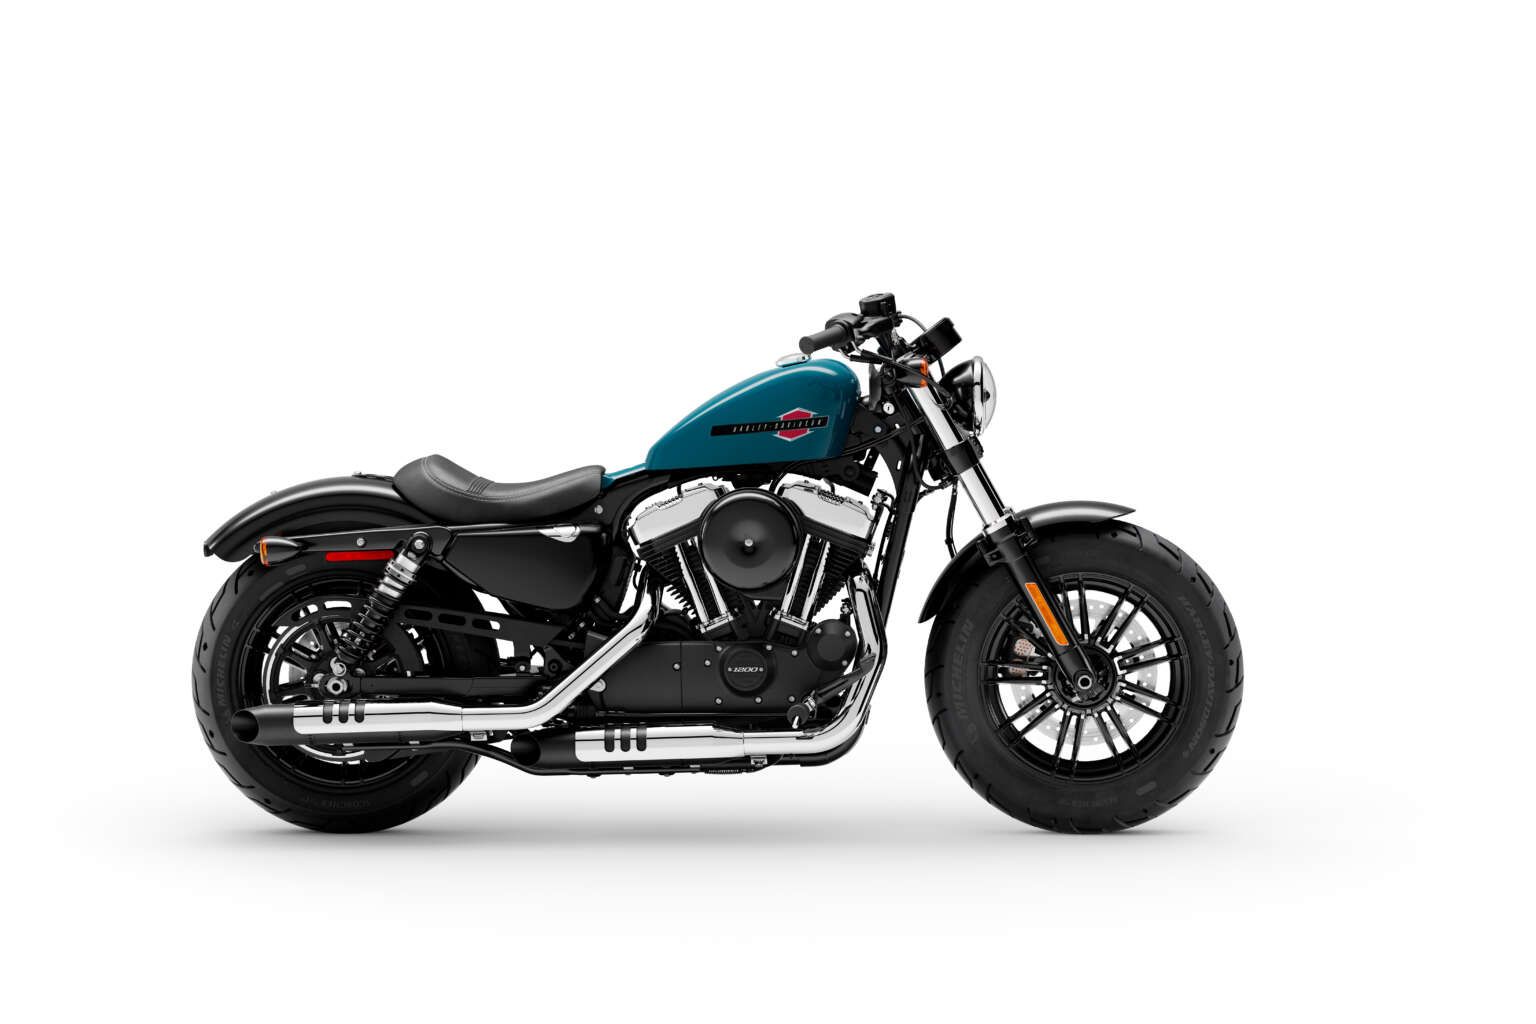 A 2021 Harley-Davidson Forty-Eight street motorcycle.